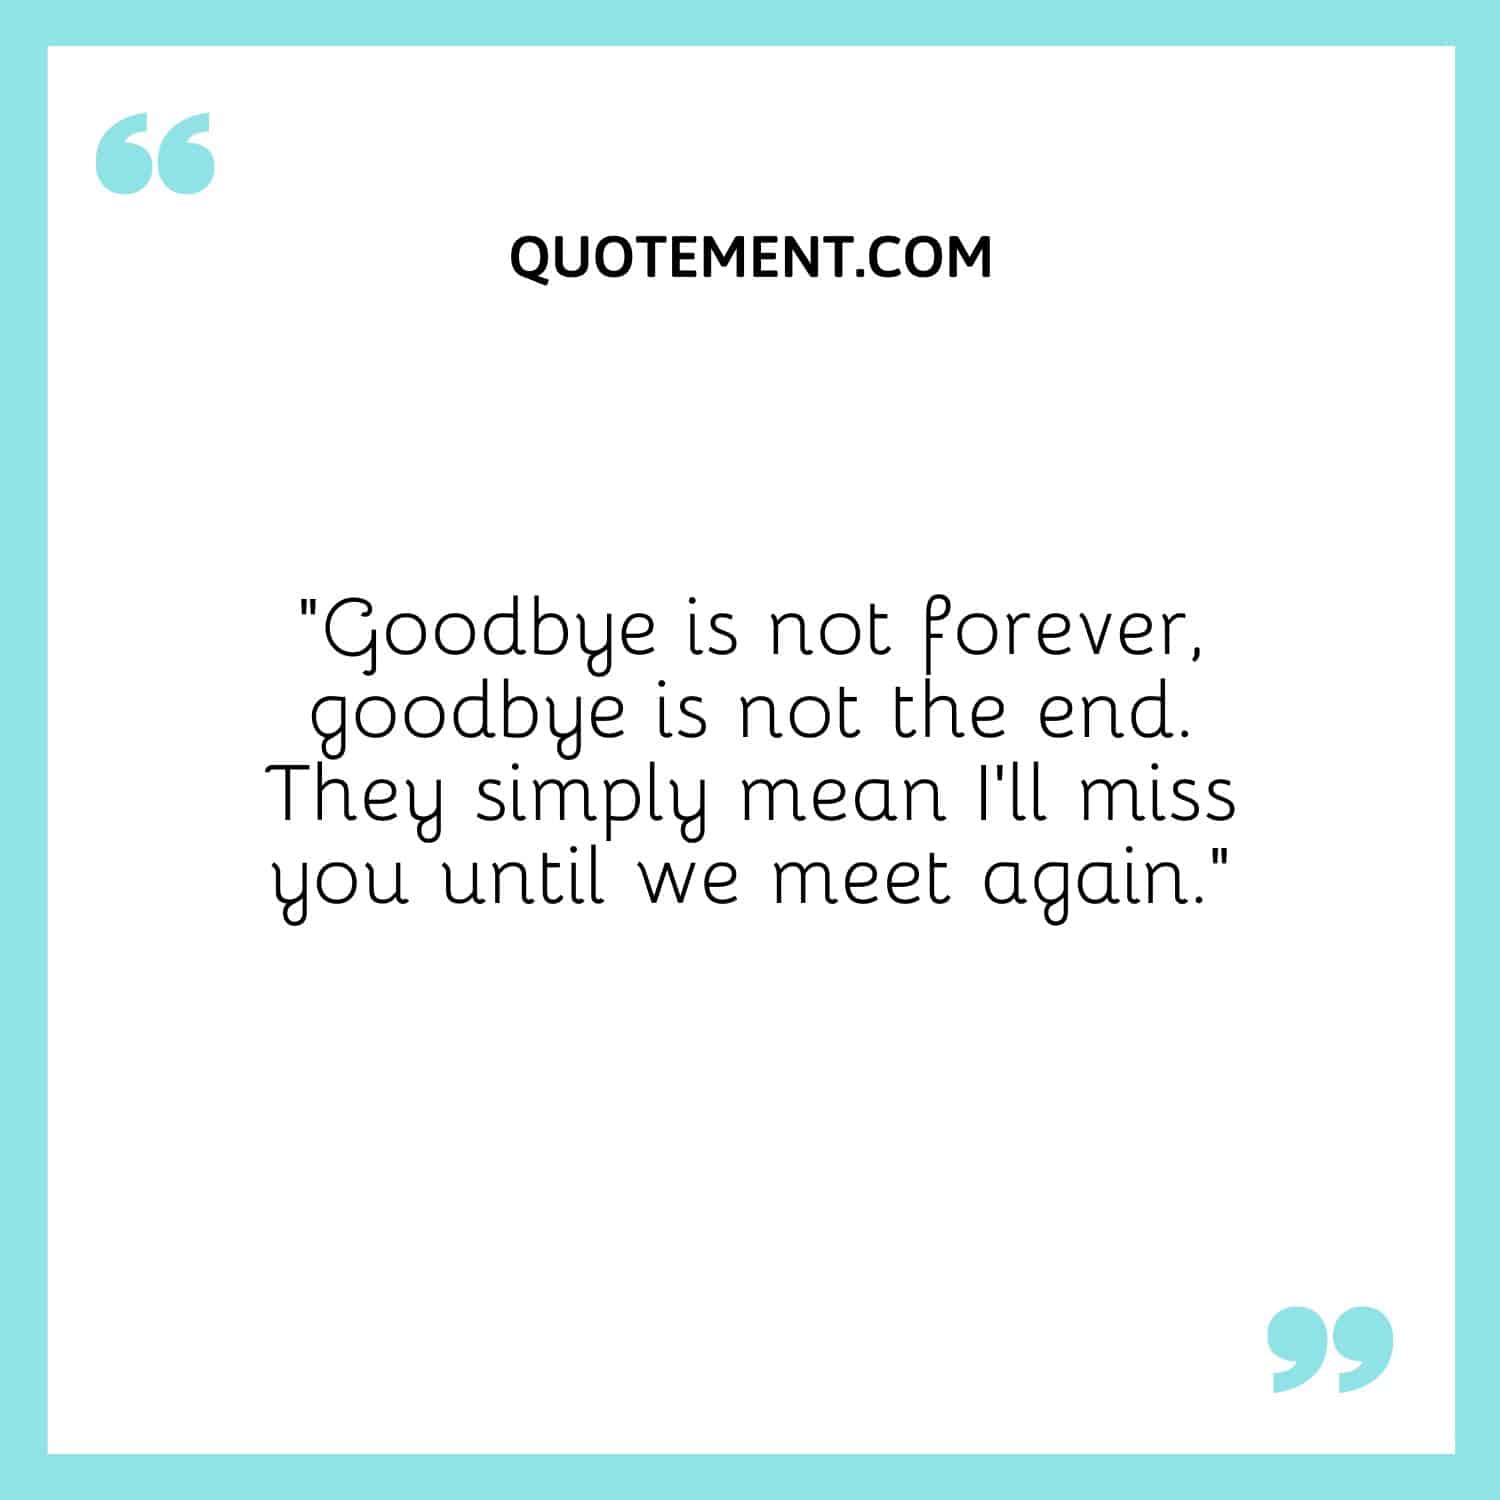 Goodbye is not forever, goodbye is not the end